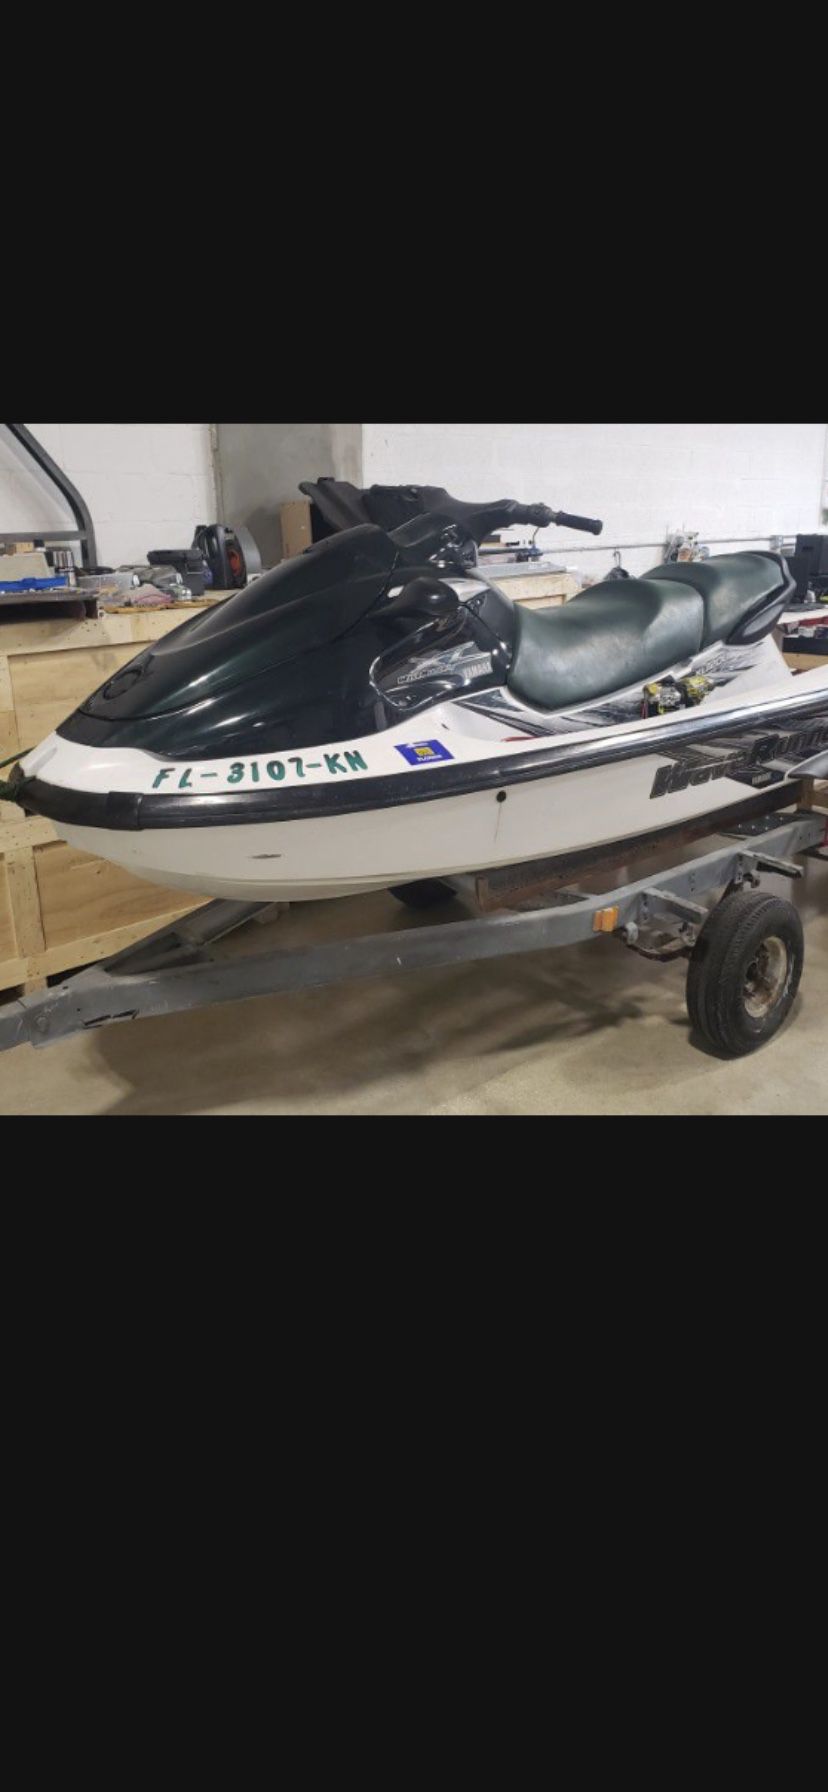 Photo Yamaha XL1200 Wave runner Jet Ski With Reverse Ready To Ride Everything Works Perfectly ..title In Hand ..